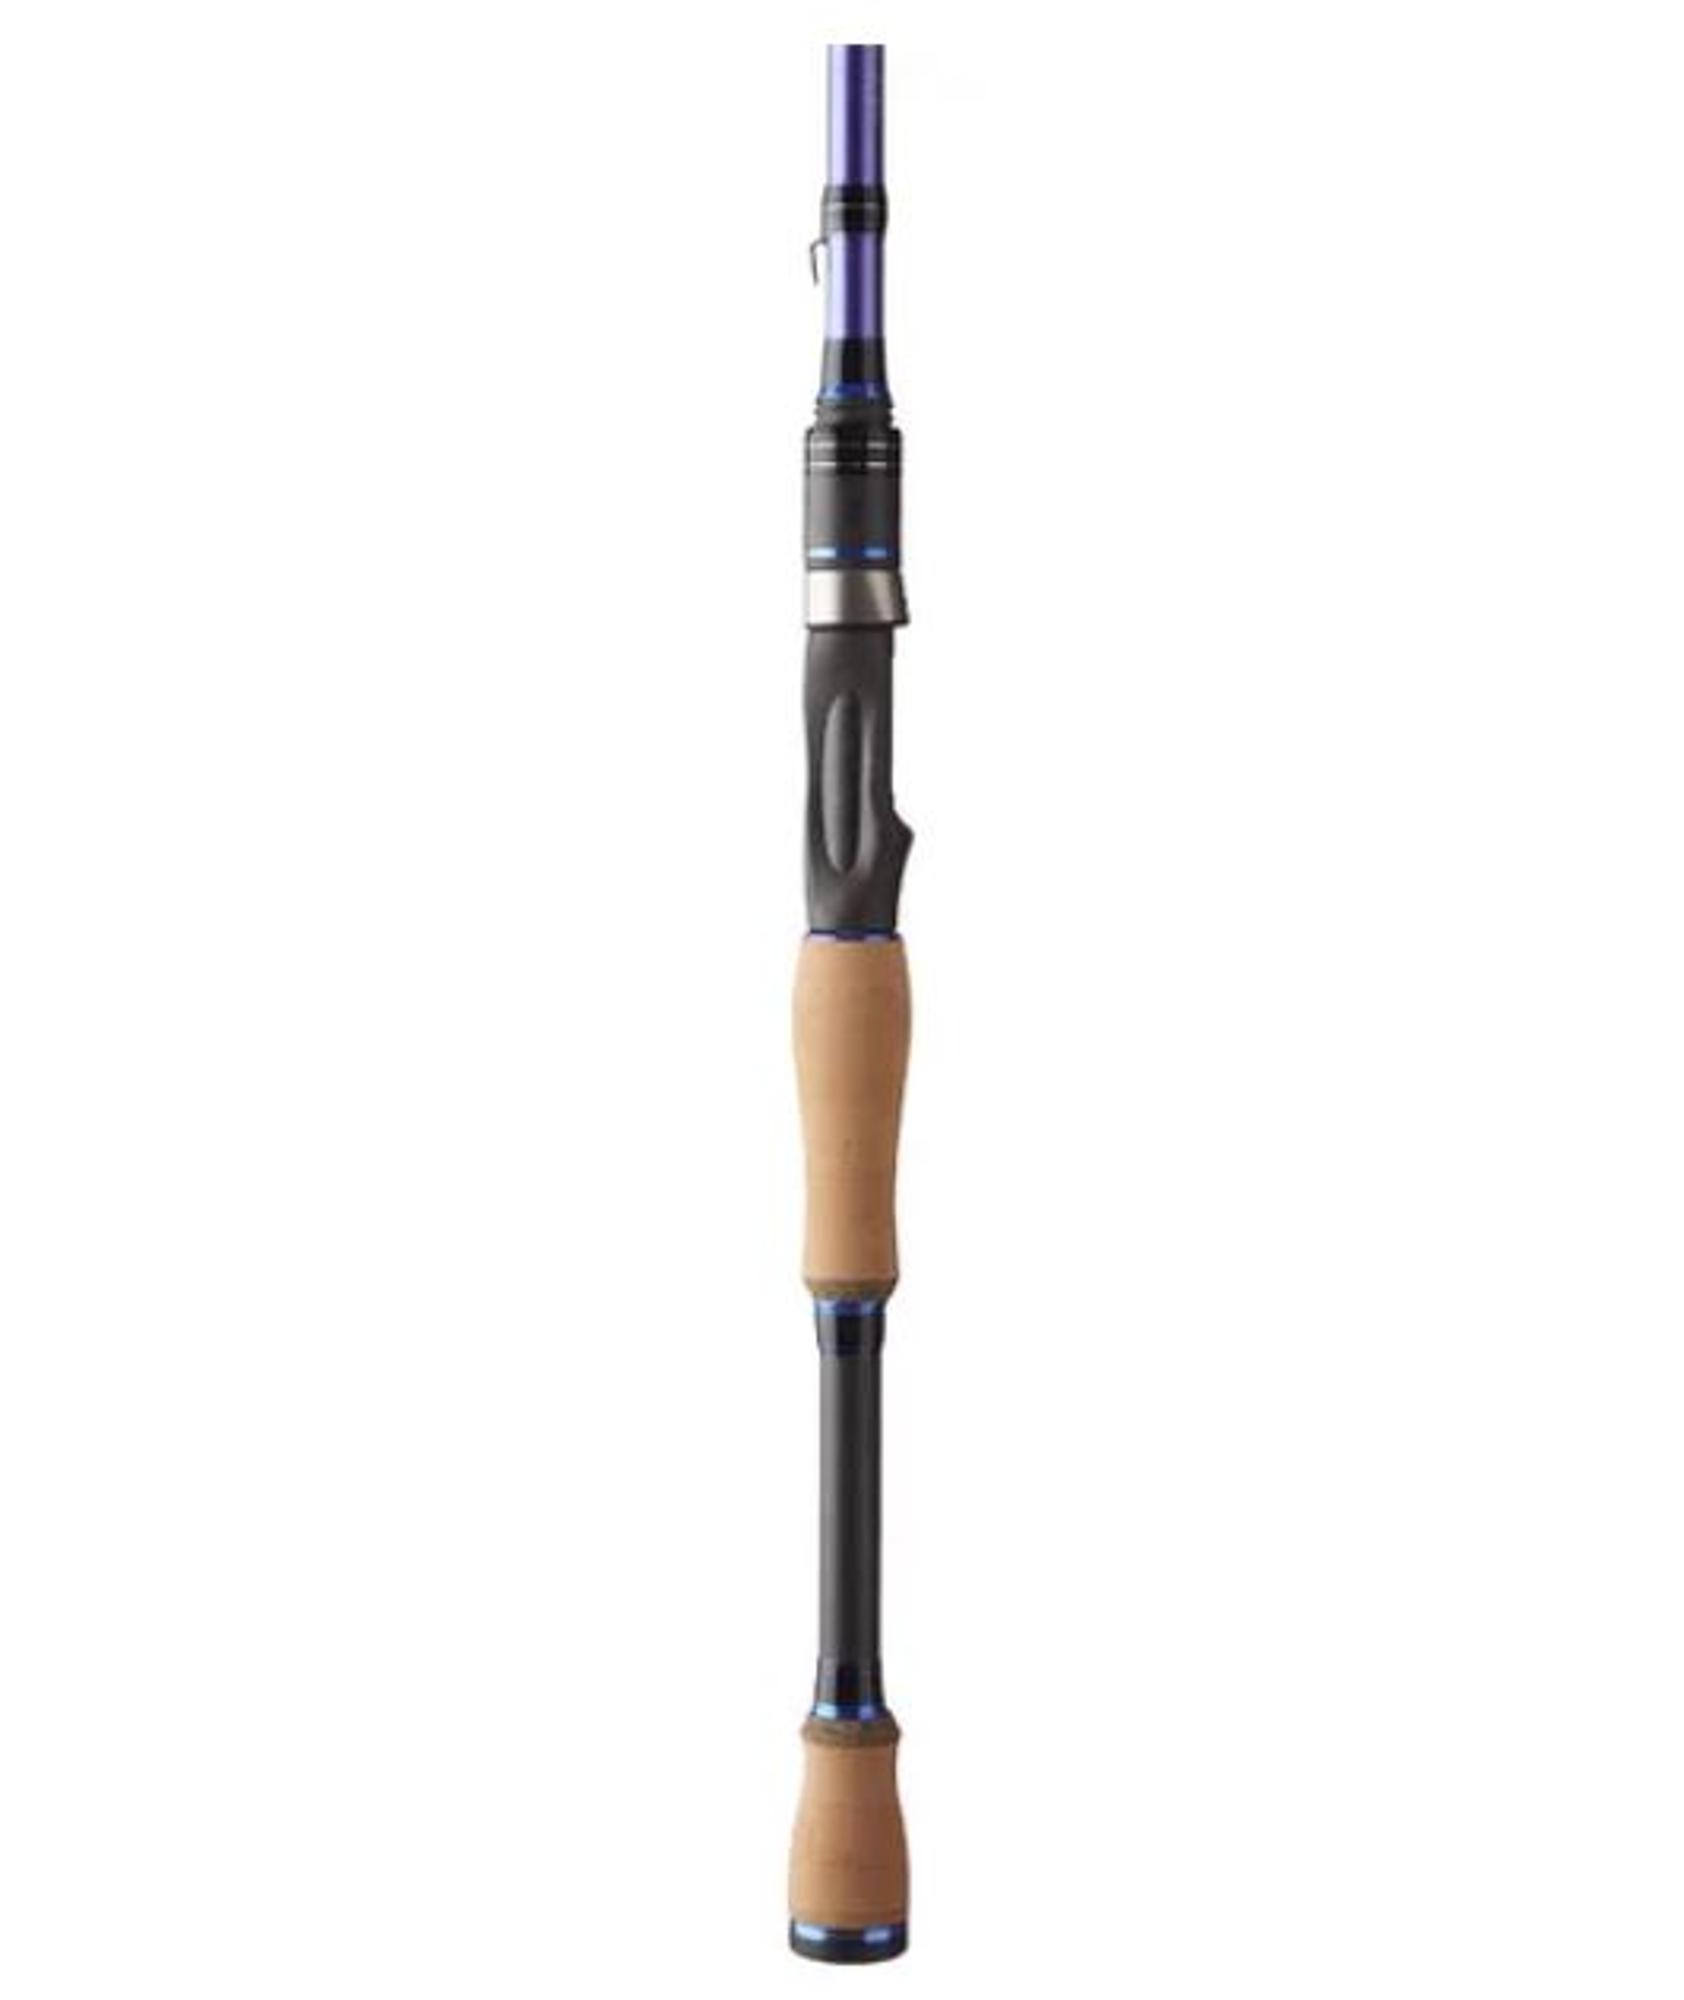 Endurance 755 CB 7ft 5in Medium Moderate Fast | 857489005541 | POWELL RODS | Fishing | Rods | Casting